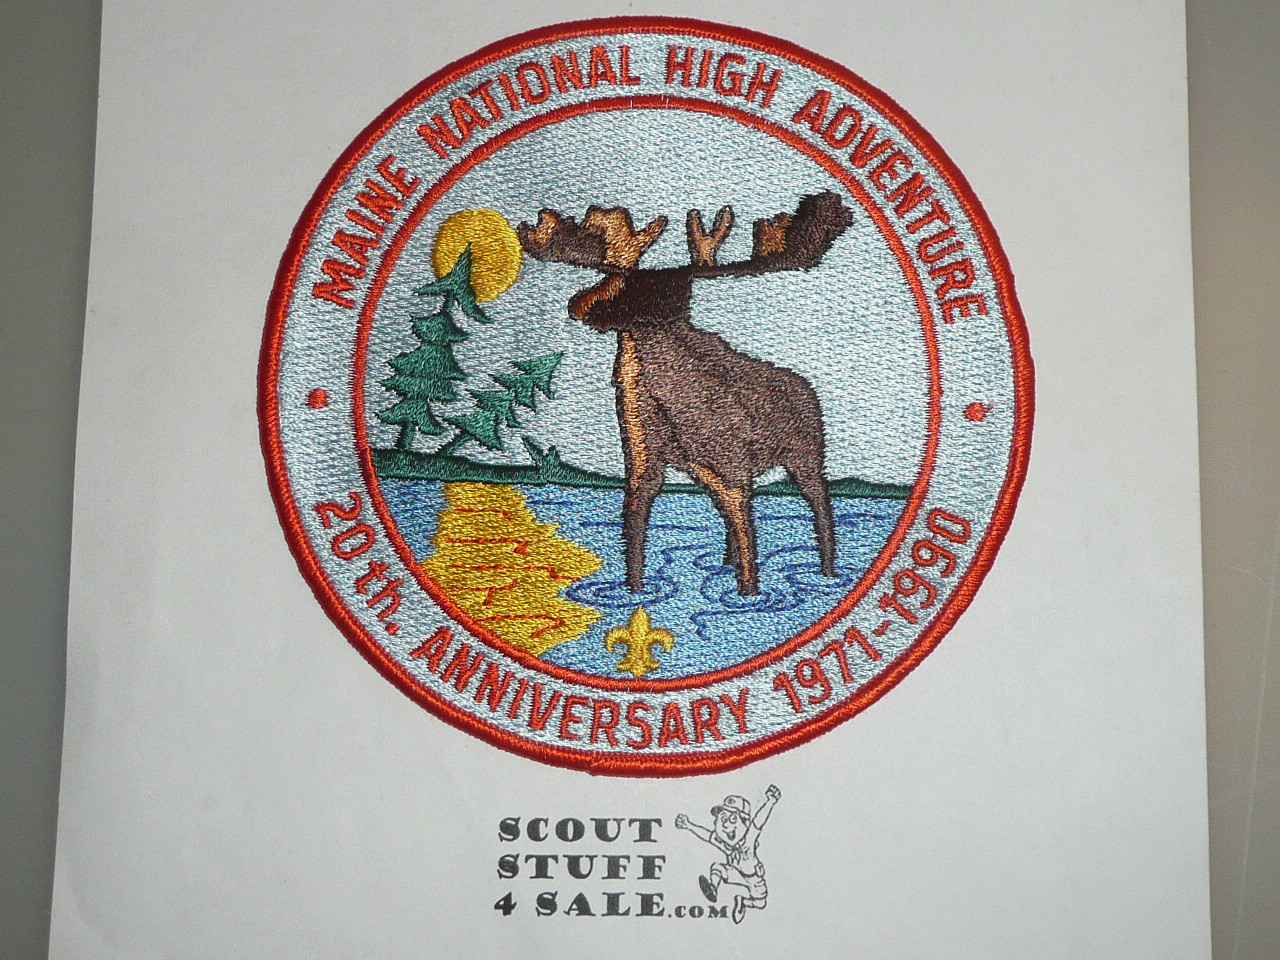 Maine National High Adventure Area 20th Anniversary Jacket Patch, 1990